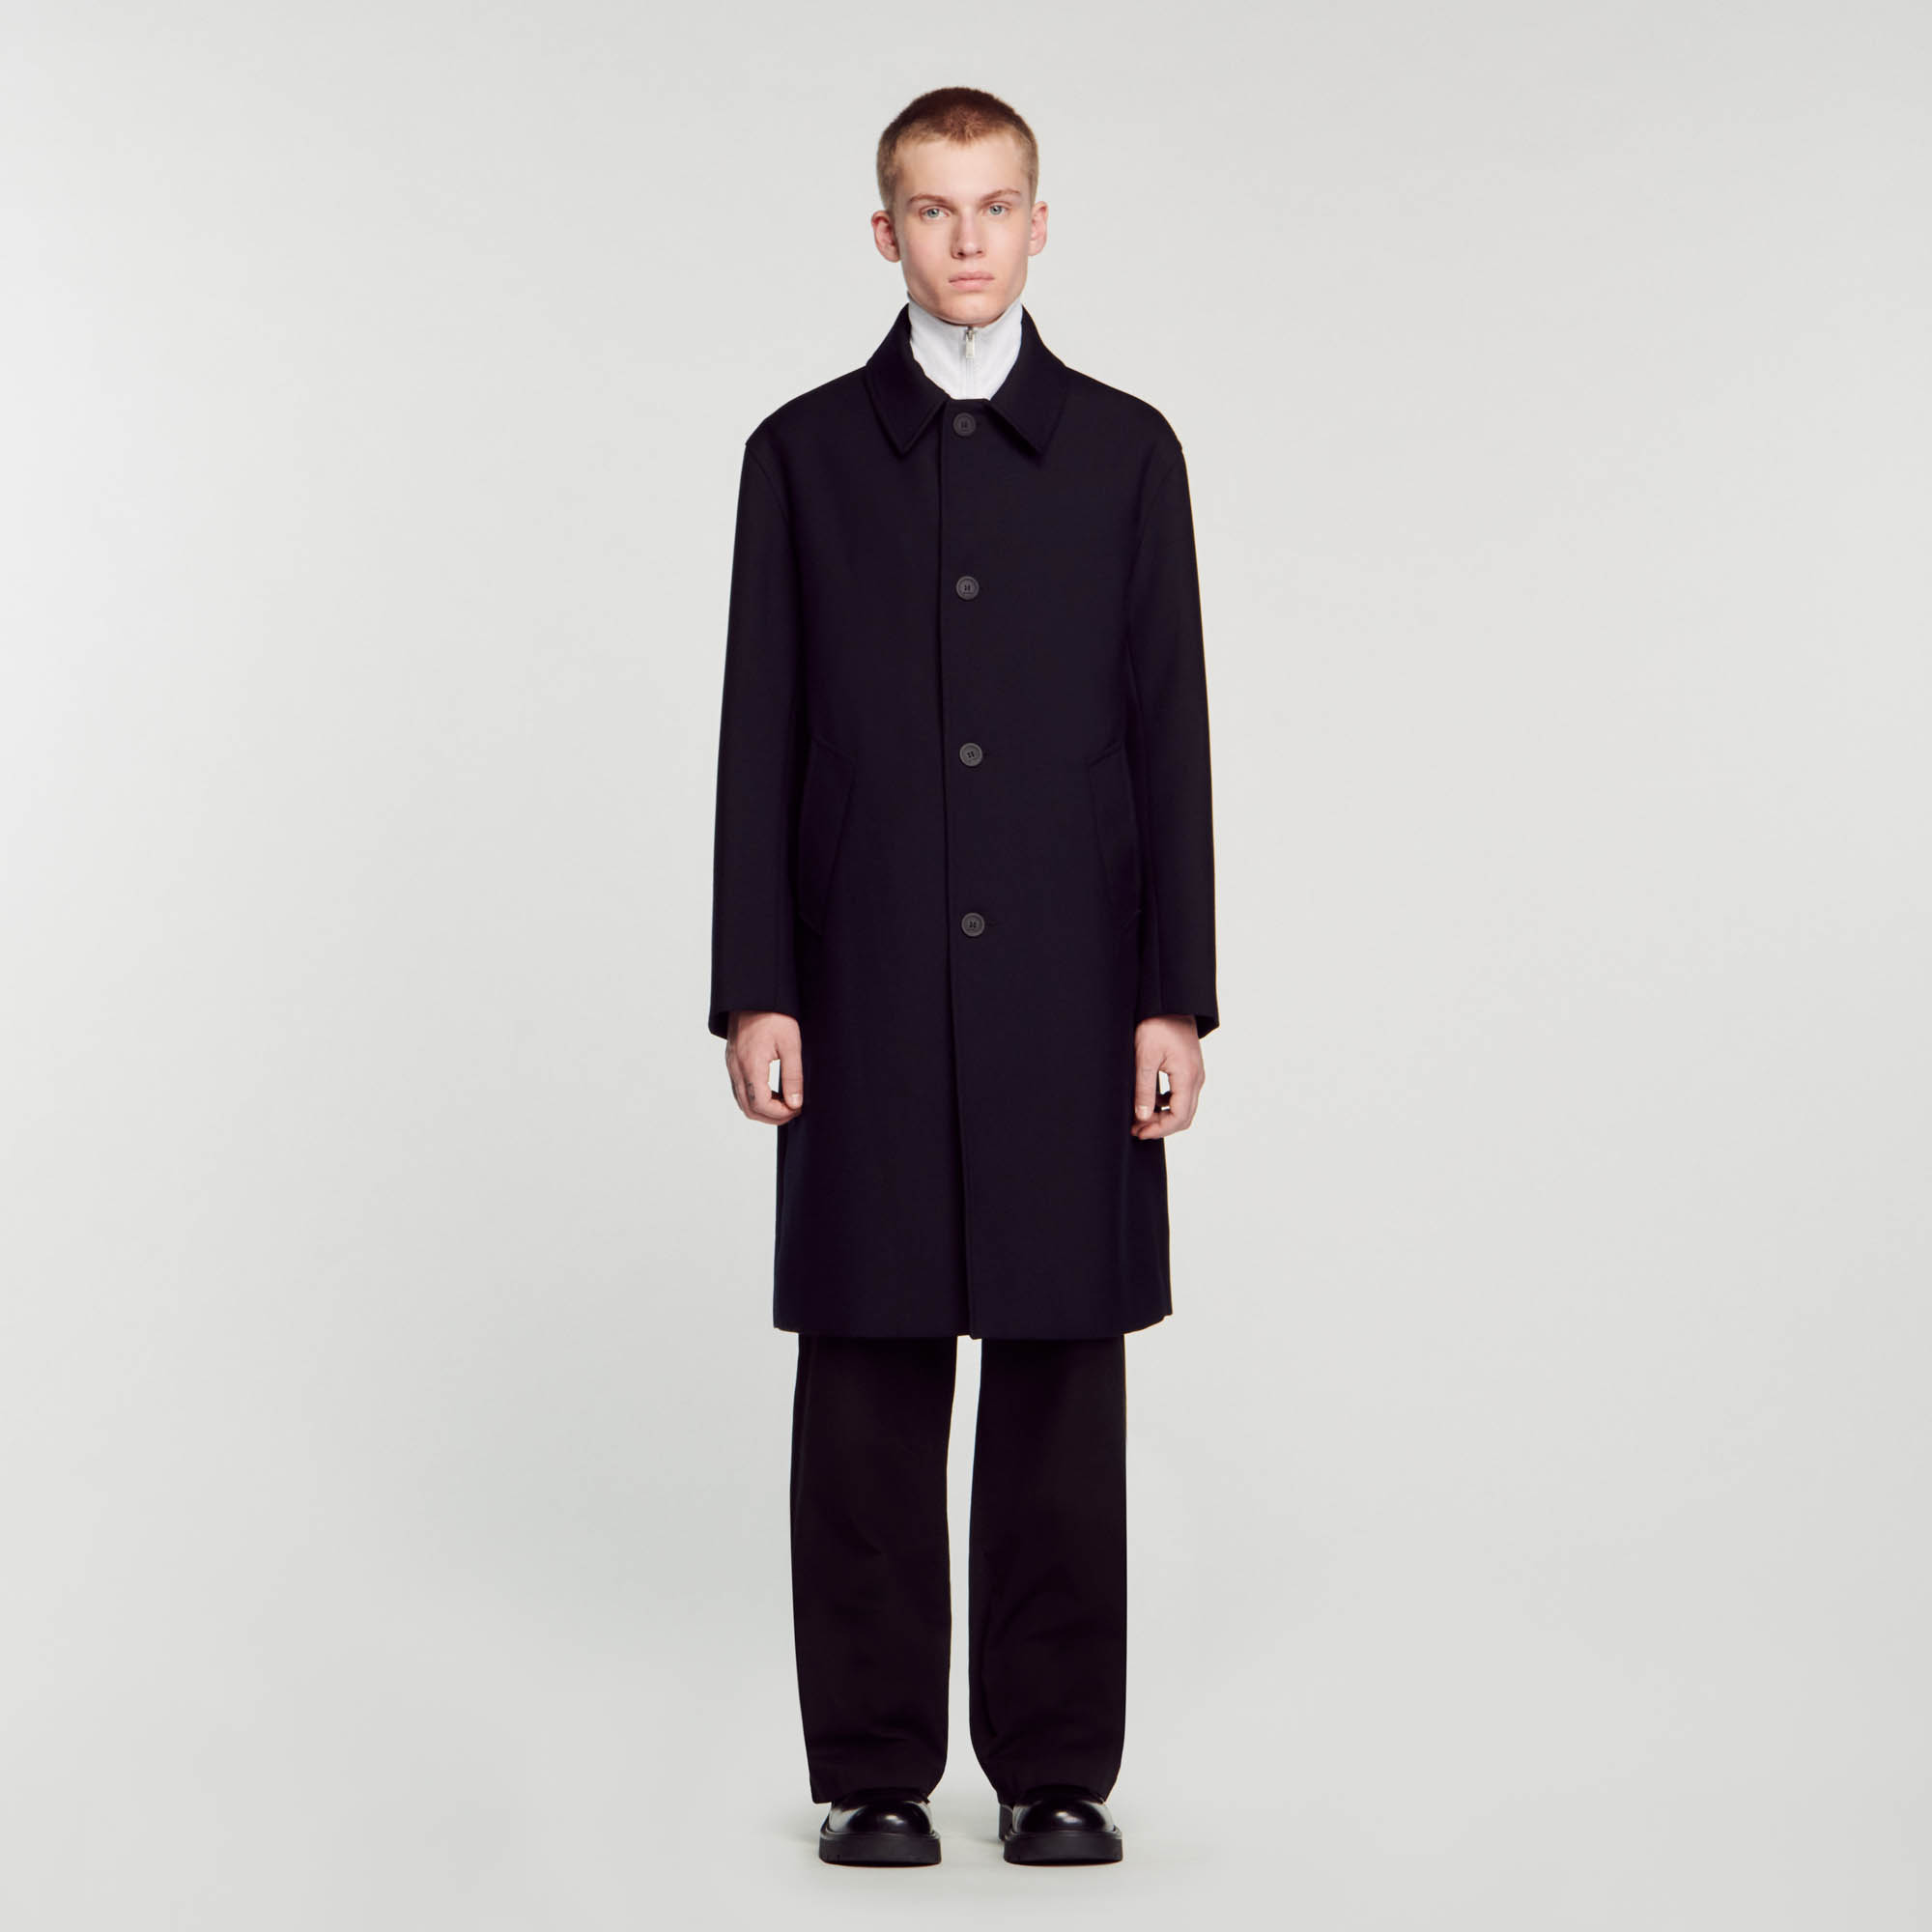 Sandro wool Overcoat with classic collar, long sleeves and button fastening